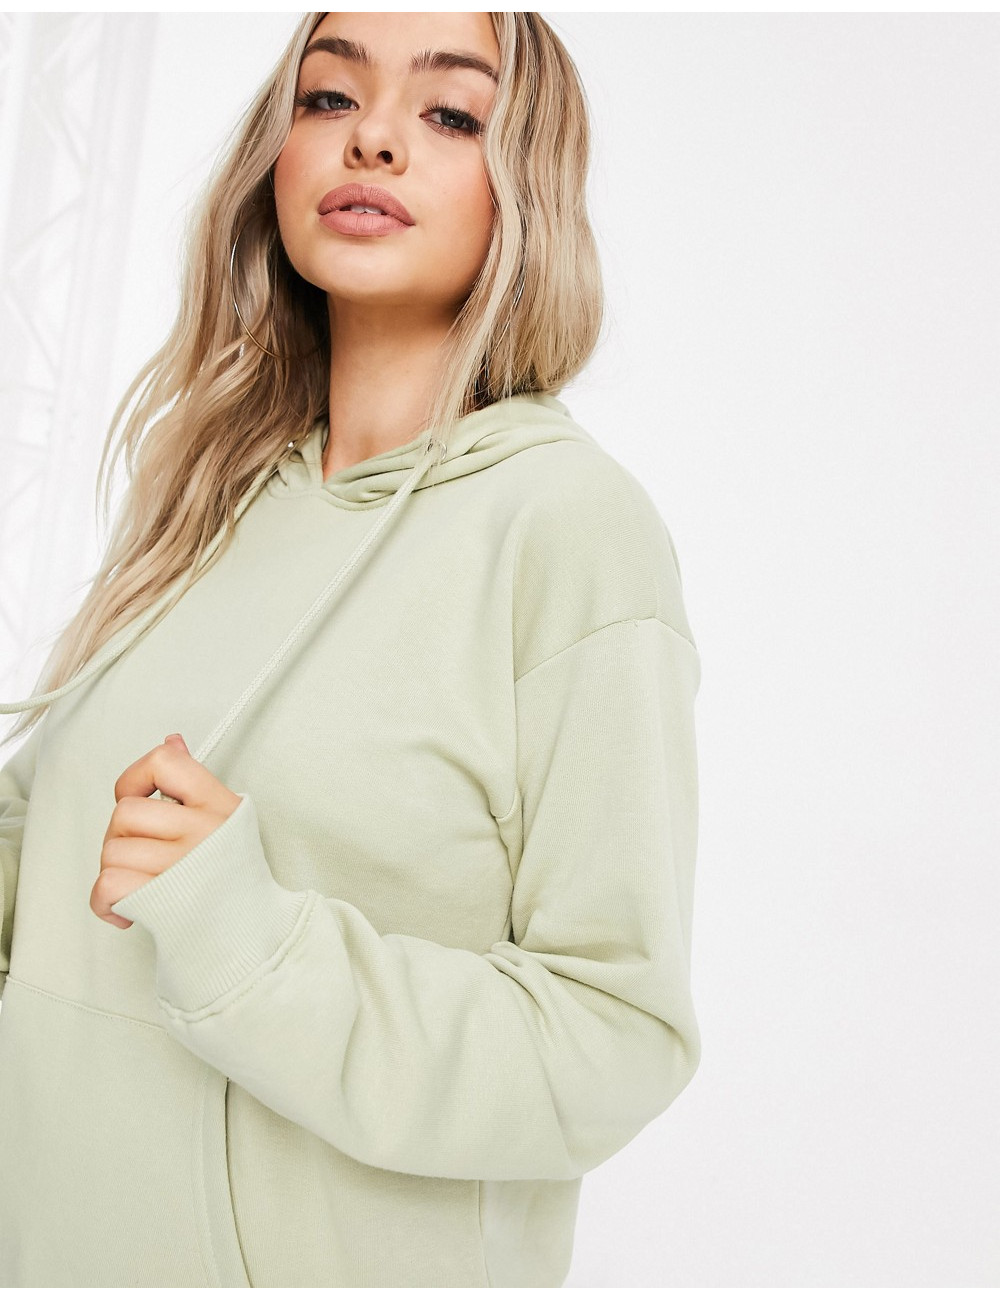 Missguided co-ord hoody and...